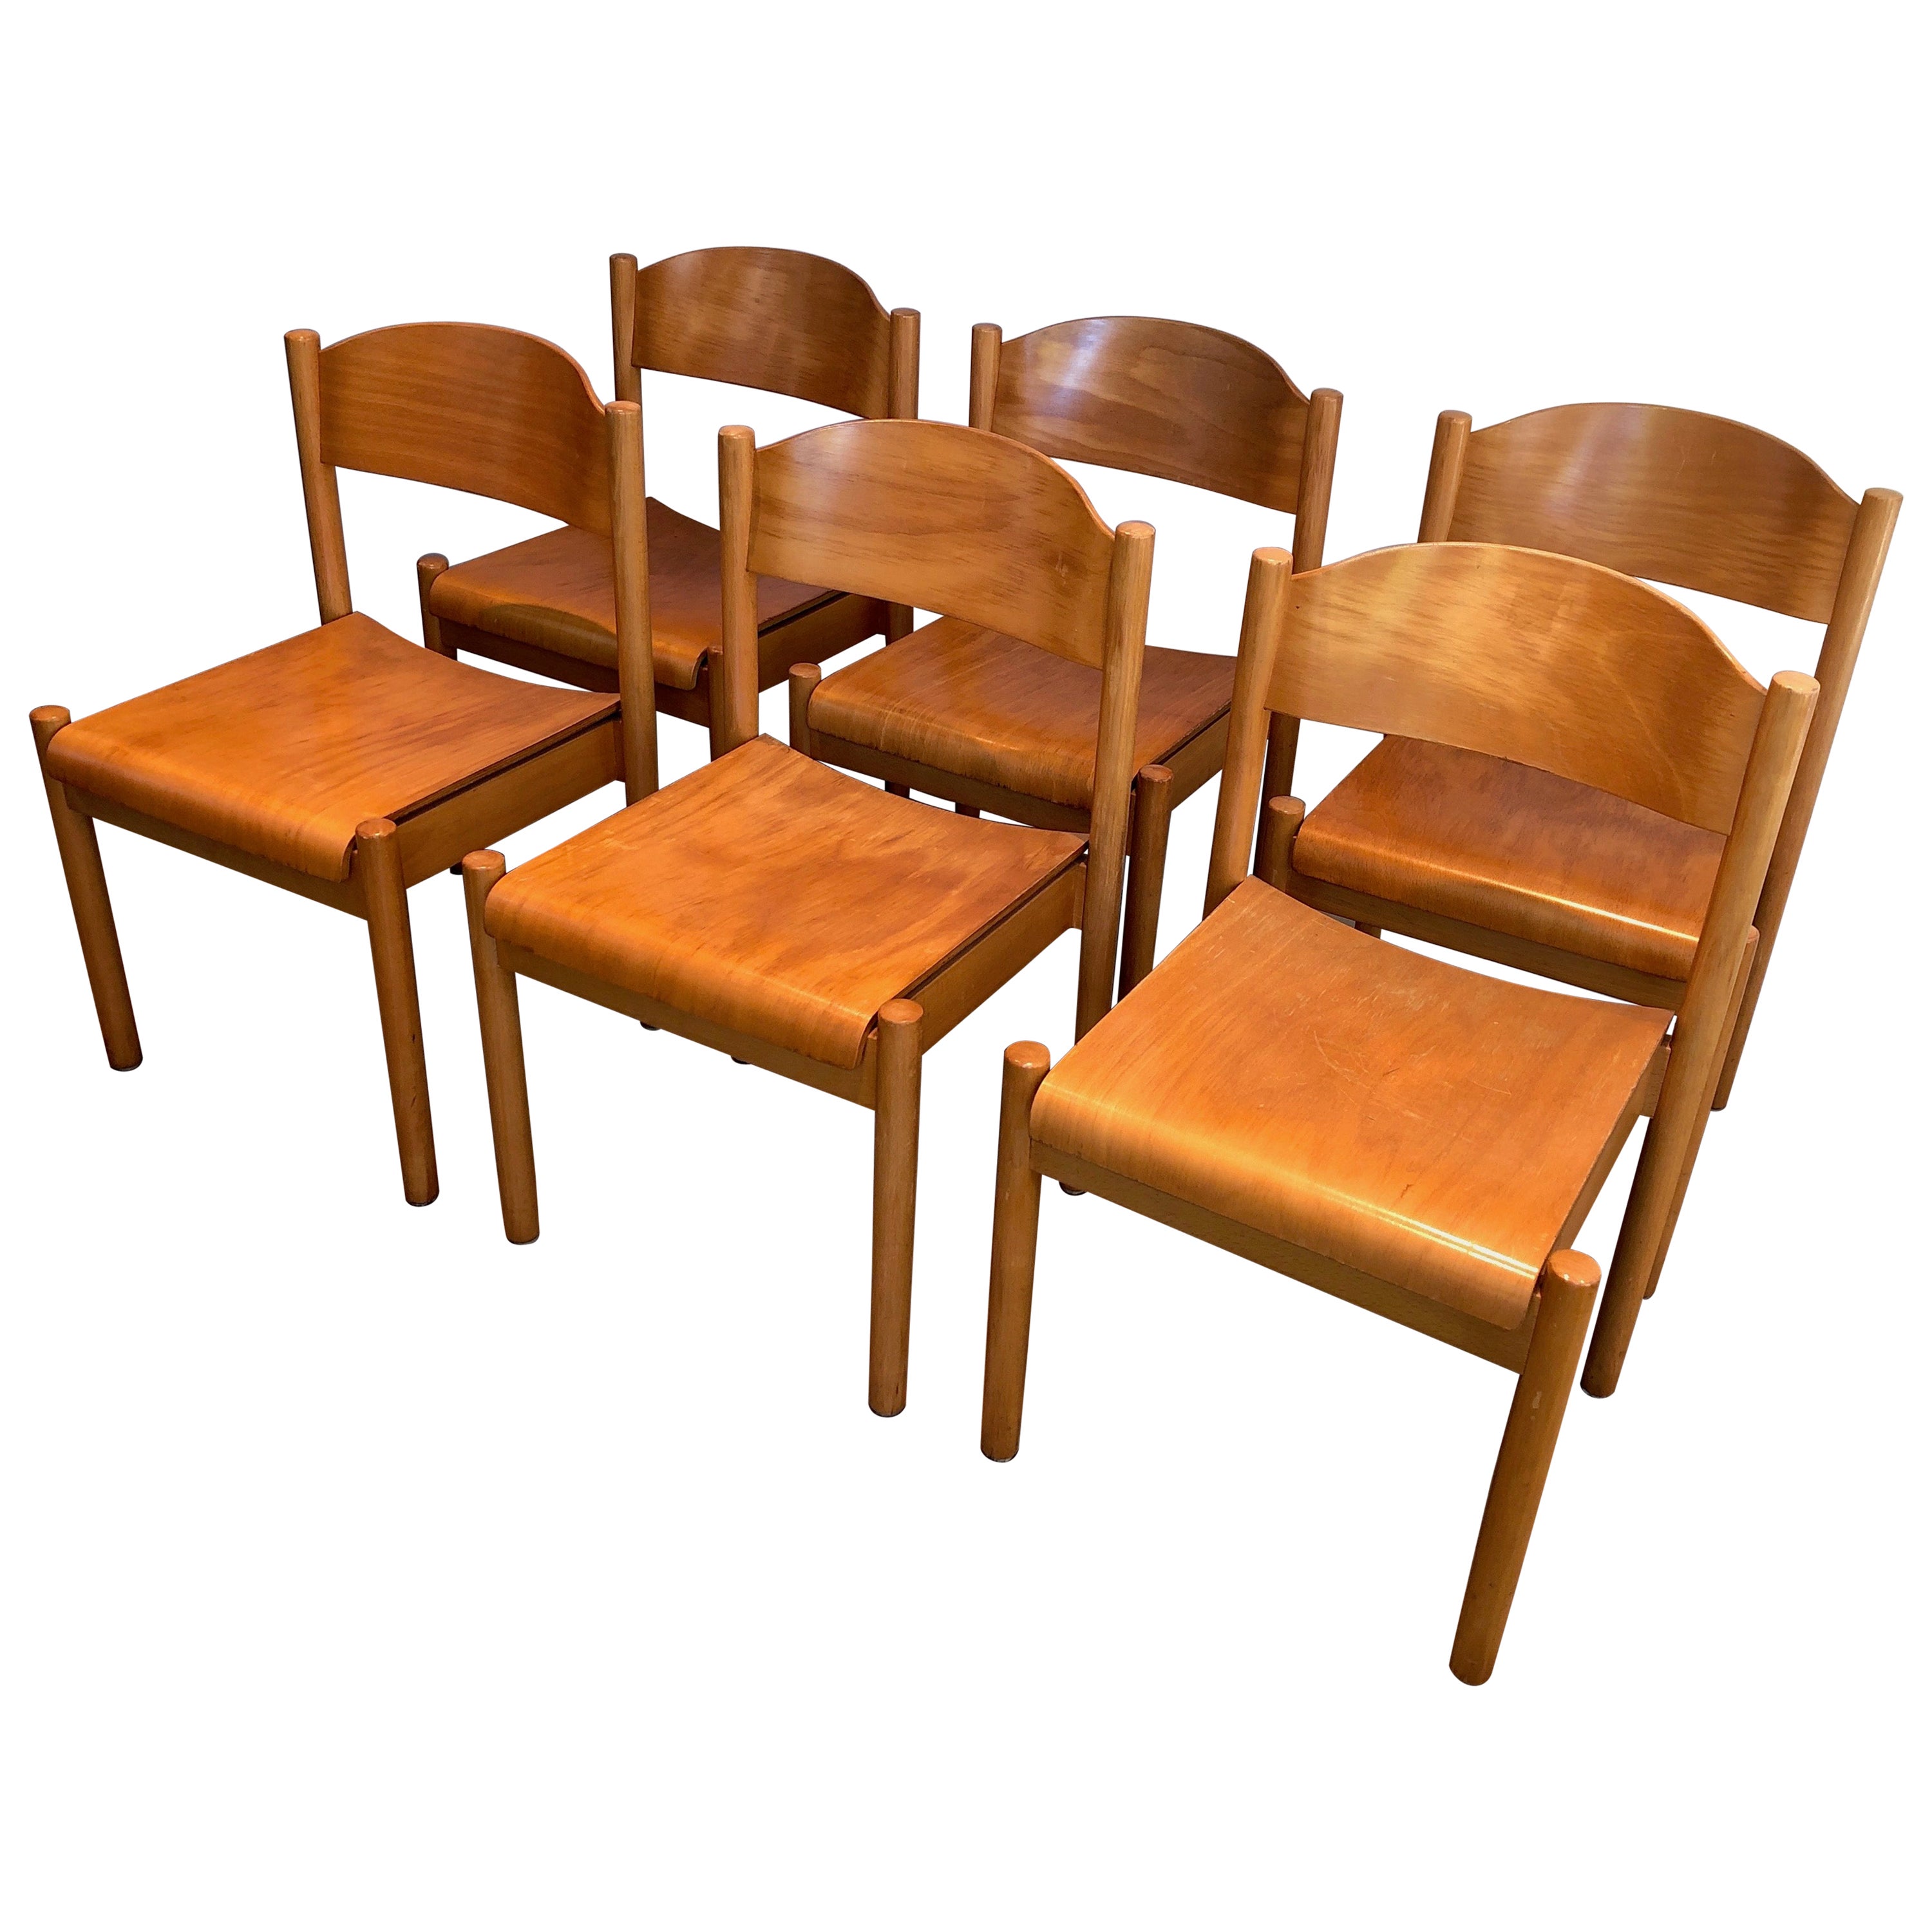 Set of 6 Stackable Pine Chairs, German Work by Karl Klipper, Circa 1970 For Sale